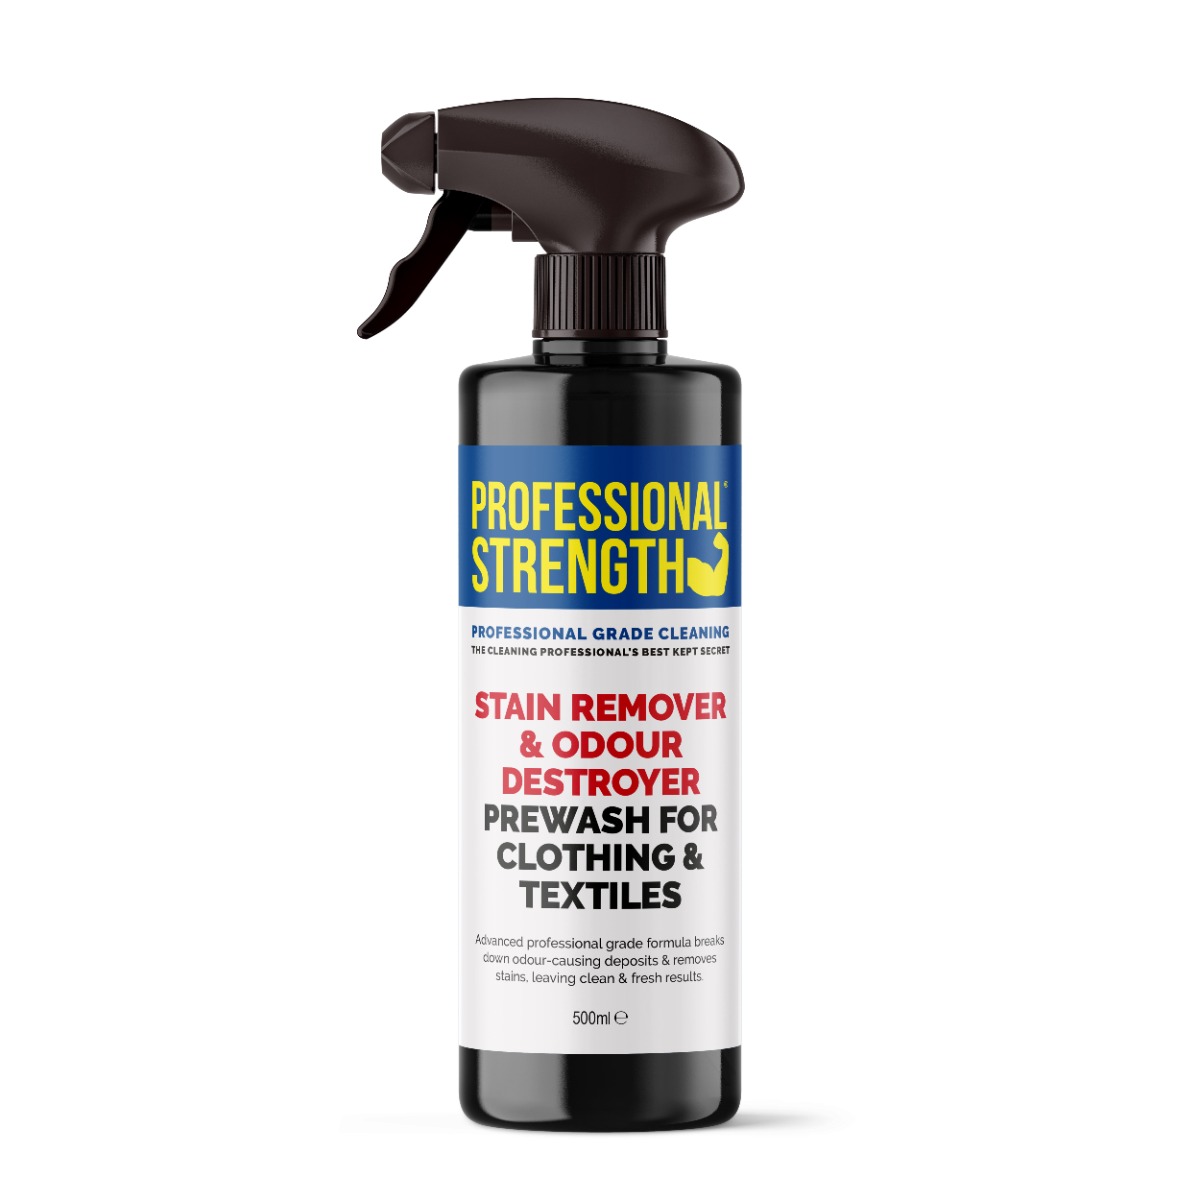 Professional Strength Pre-Wash Clothes Stain Remover | StressNoMore